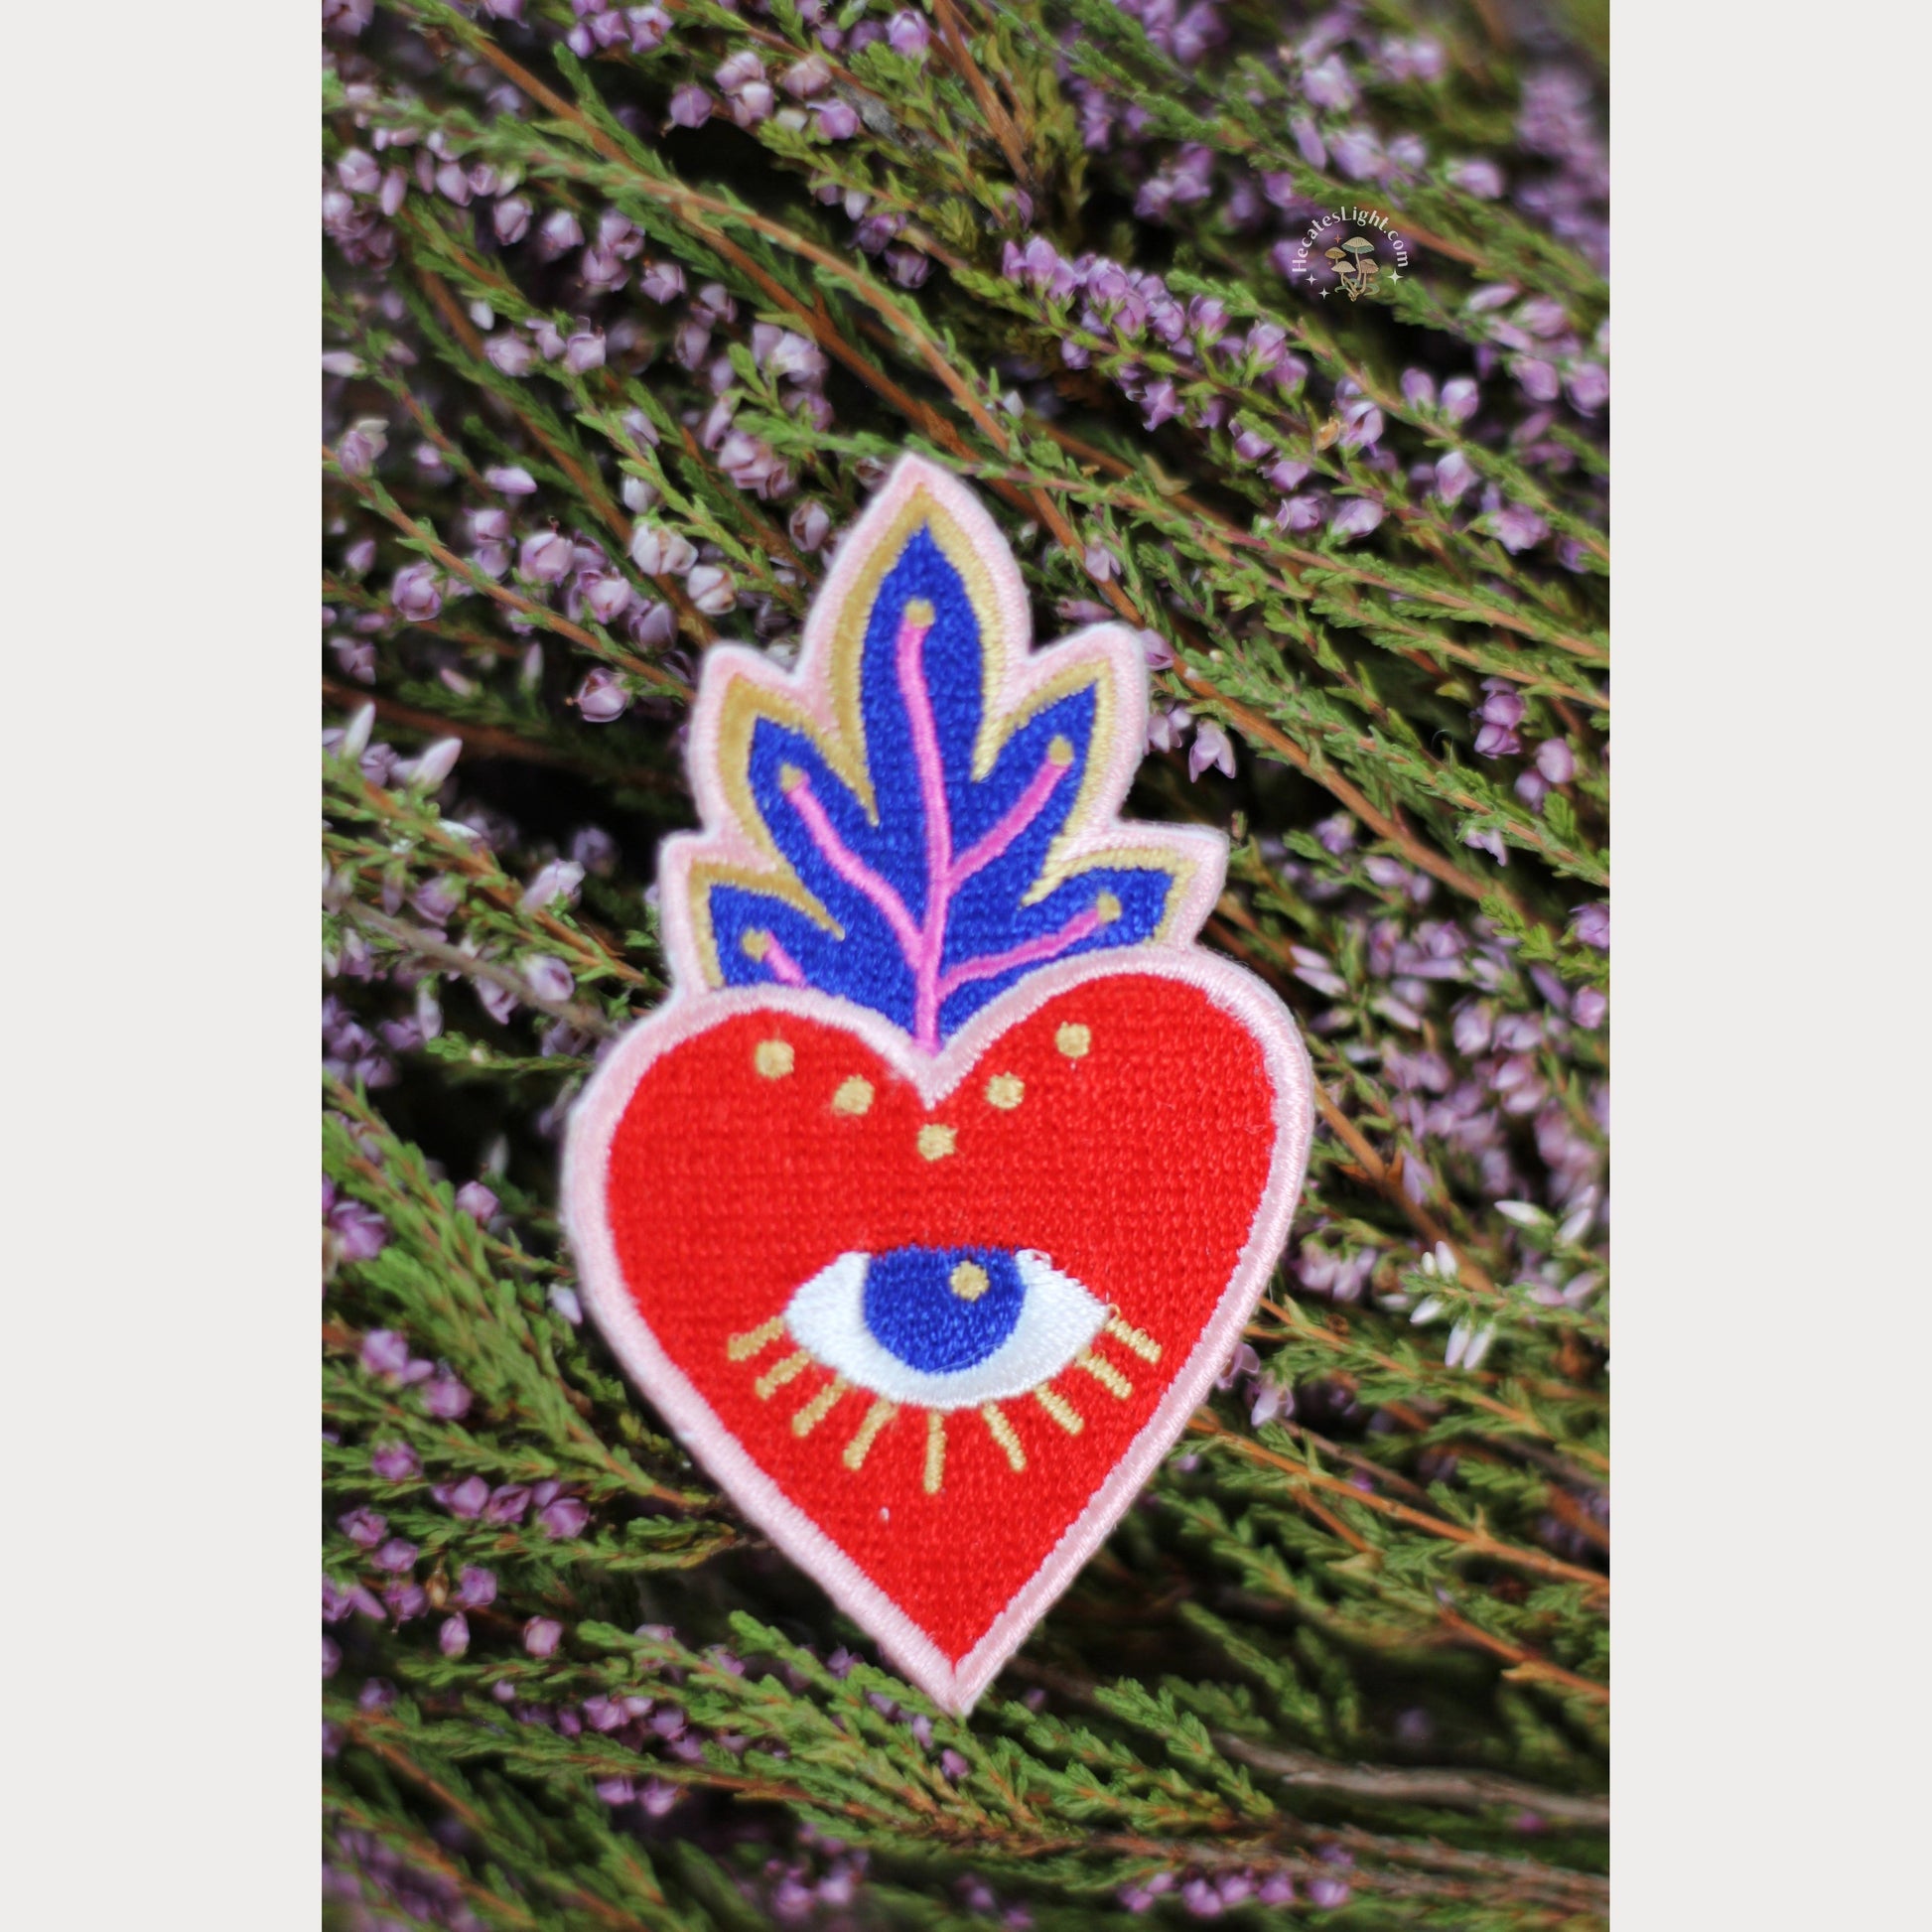 Sacred Heart Iron-on Patch MALICIEUSE accessory, calgary, canada, cloth, clothing, cottagecore, cotton, decor, decorative, embroidered, embroidery, gift, heart, iron, iron-on, patch, red, teen teenage witch, witchy clothing metaphysical occult supplies witchy hecateslight.com witchcraft cottagecore witch gifts